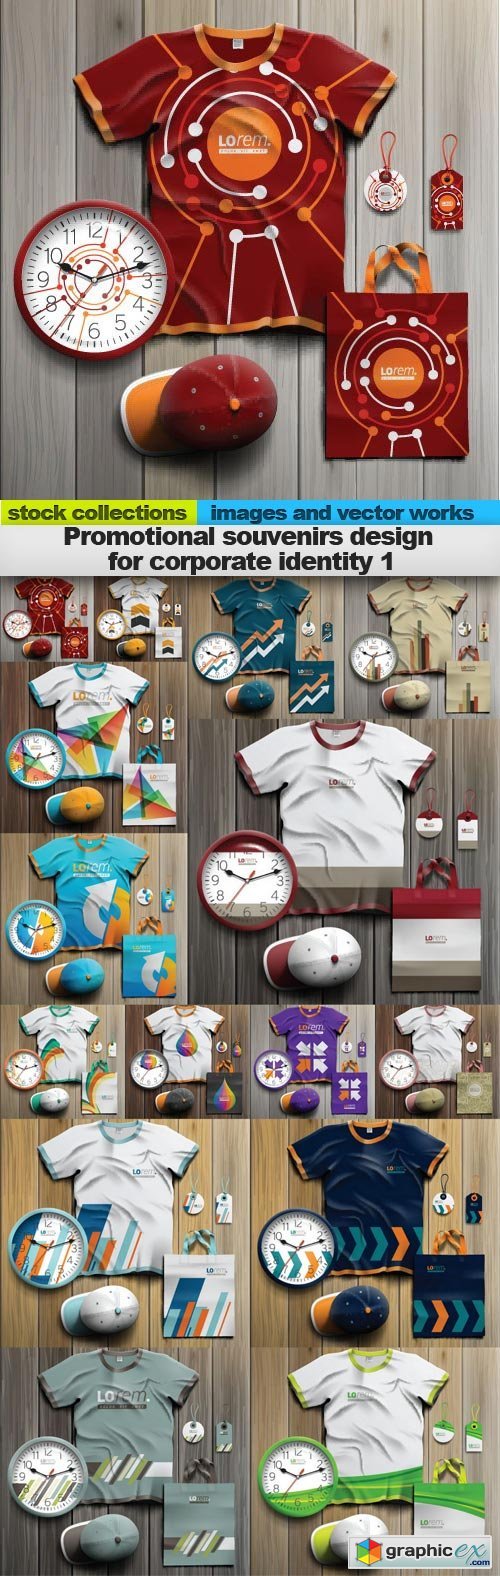 Promotional souvenirs design for corporate identity vector 1, 15 x EPS